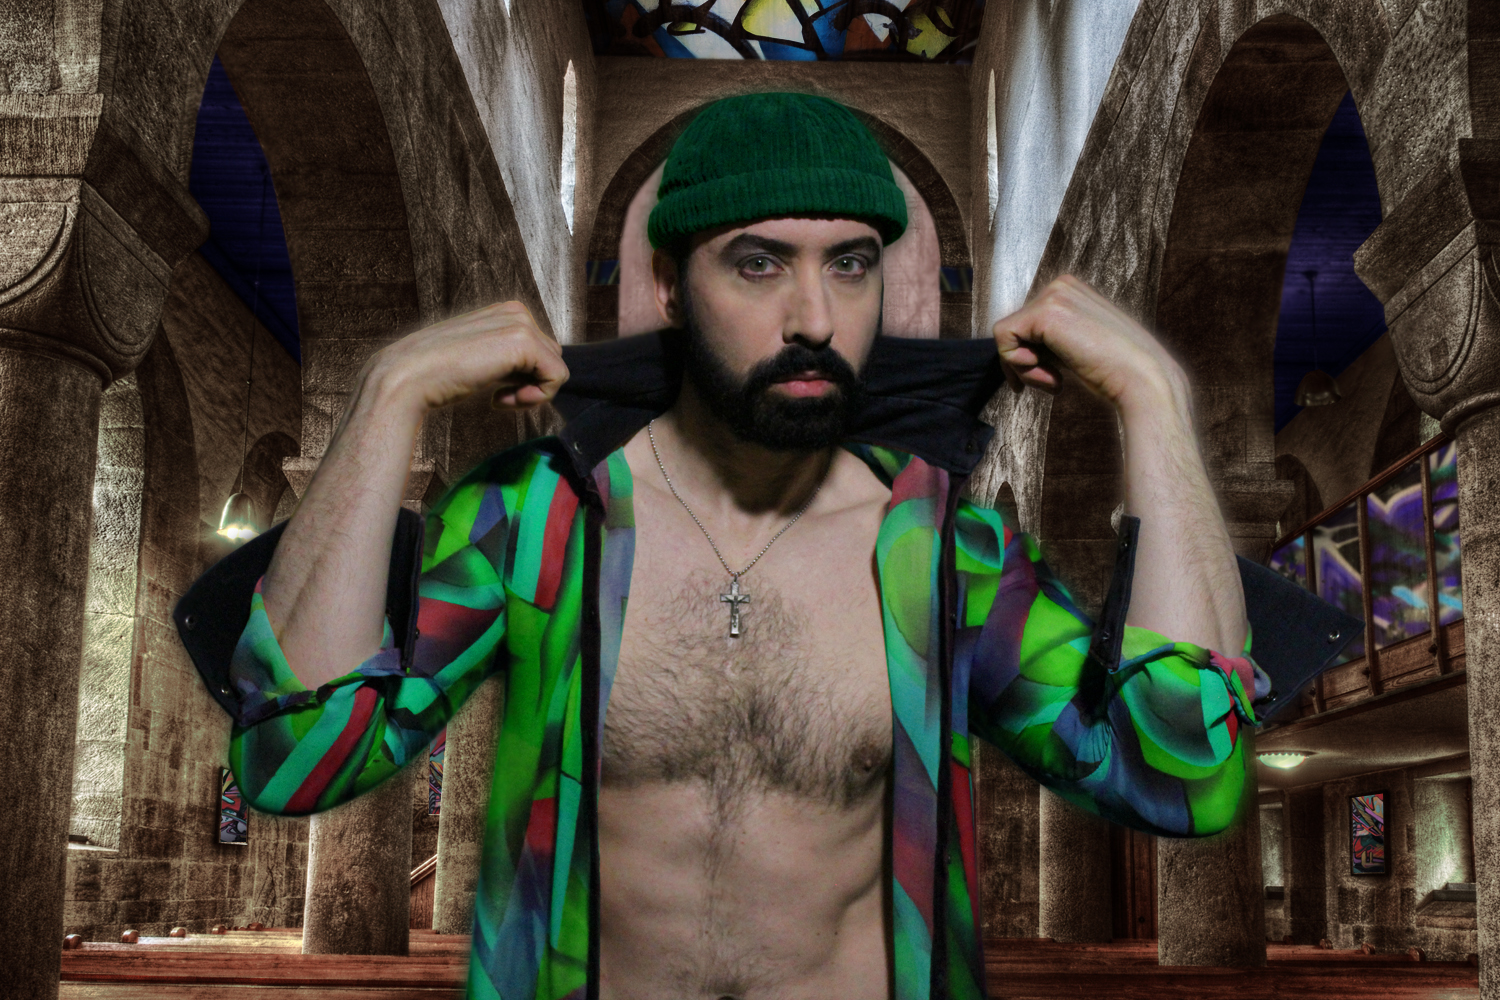 Are you starting the party without me? Commencez-vous la fête sans moi? #Green #Cross #NightLife #MoonDazeTV #RealityShow #ComingIn2015 #NewSeason #Beard #LifeIsGood